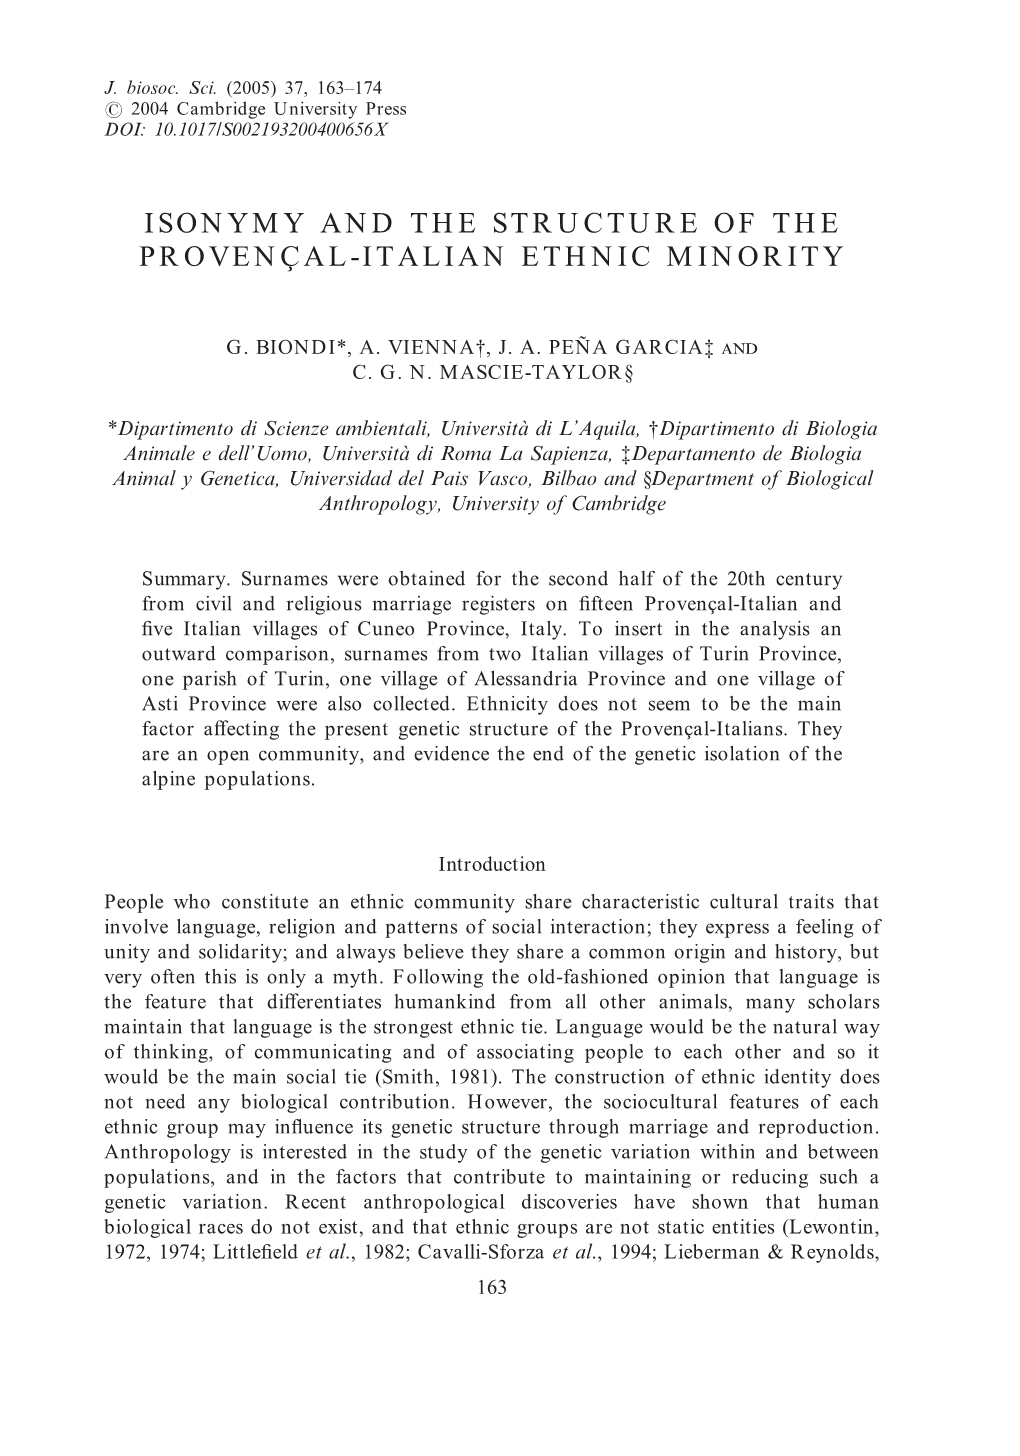 Isonymy and the Structure of the Provençal-Italian Ethnic Minority